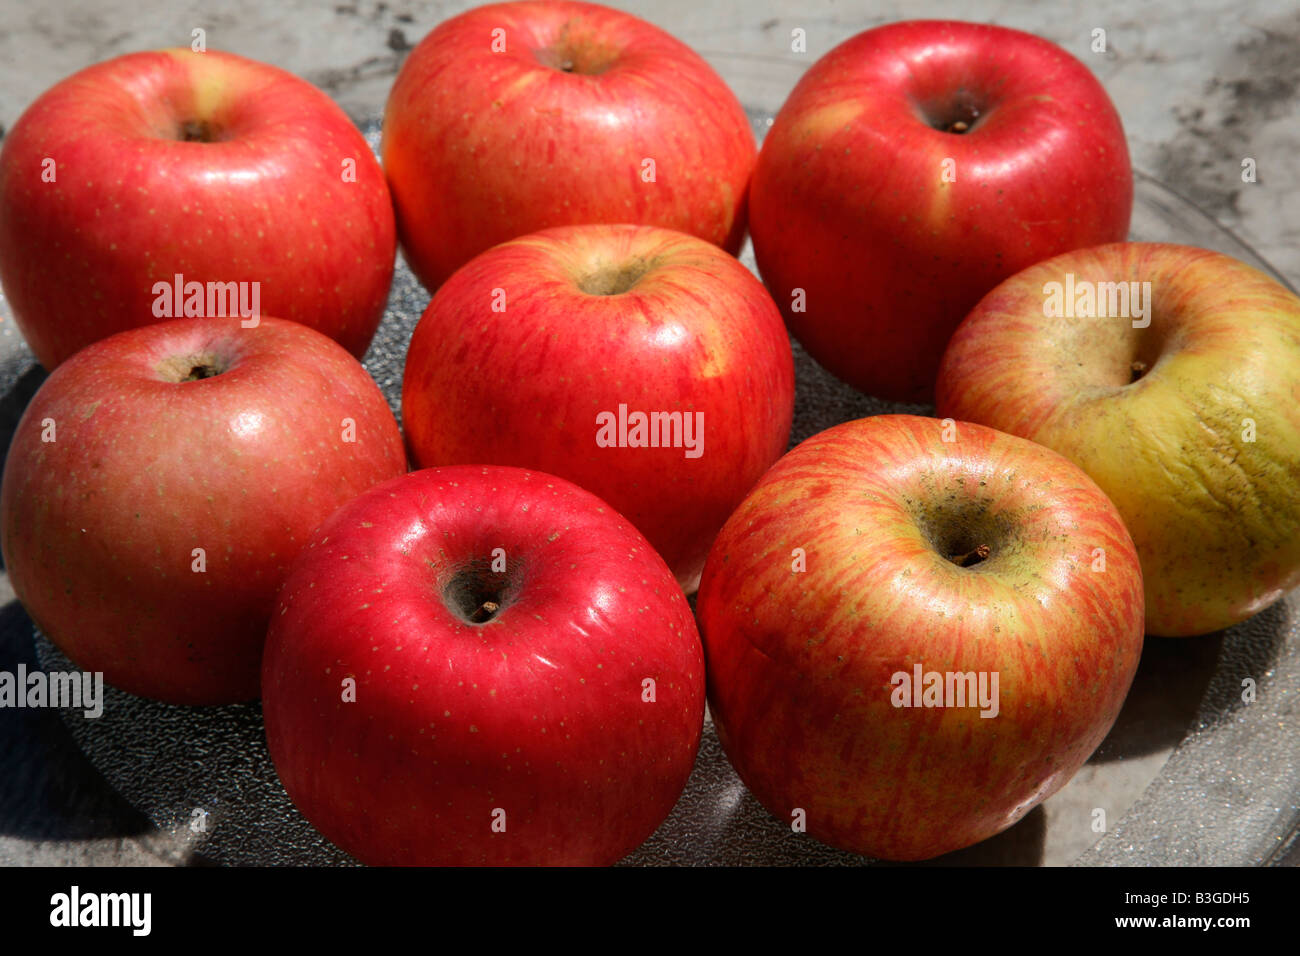 B3 vitamin foods Cut Out Stock Images & Pictures - Alamy